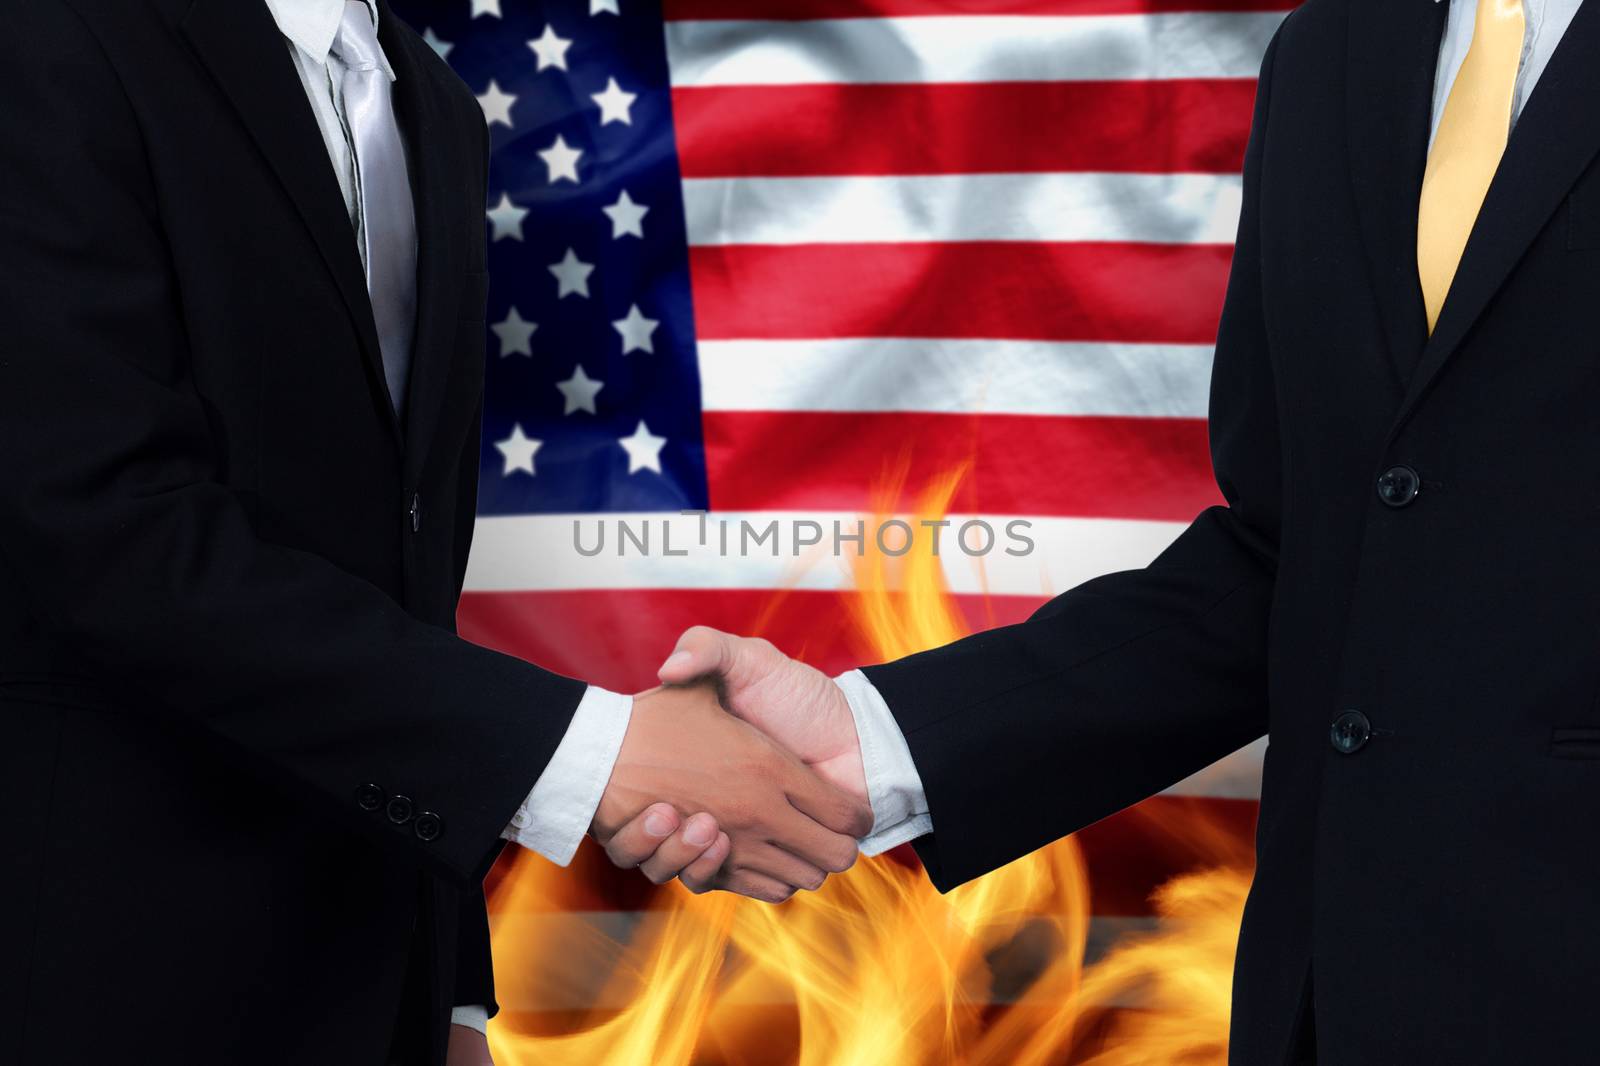 trade agreements and business practices in the United States concept. hand of businessman shaking on America flag background and fire by asiandelight